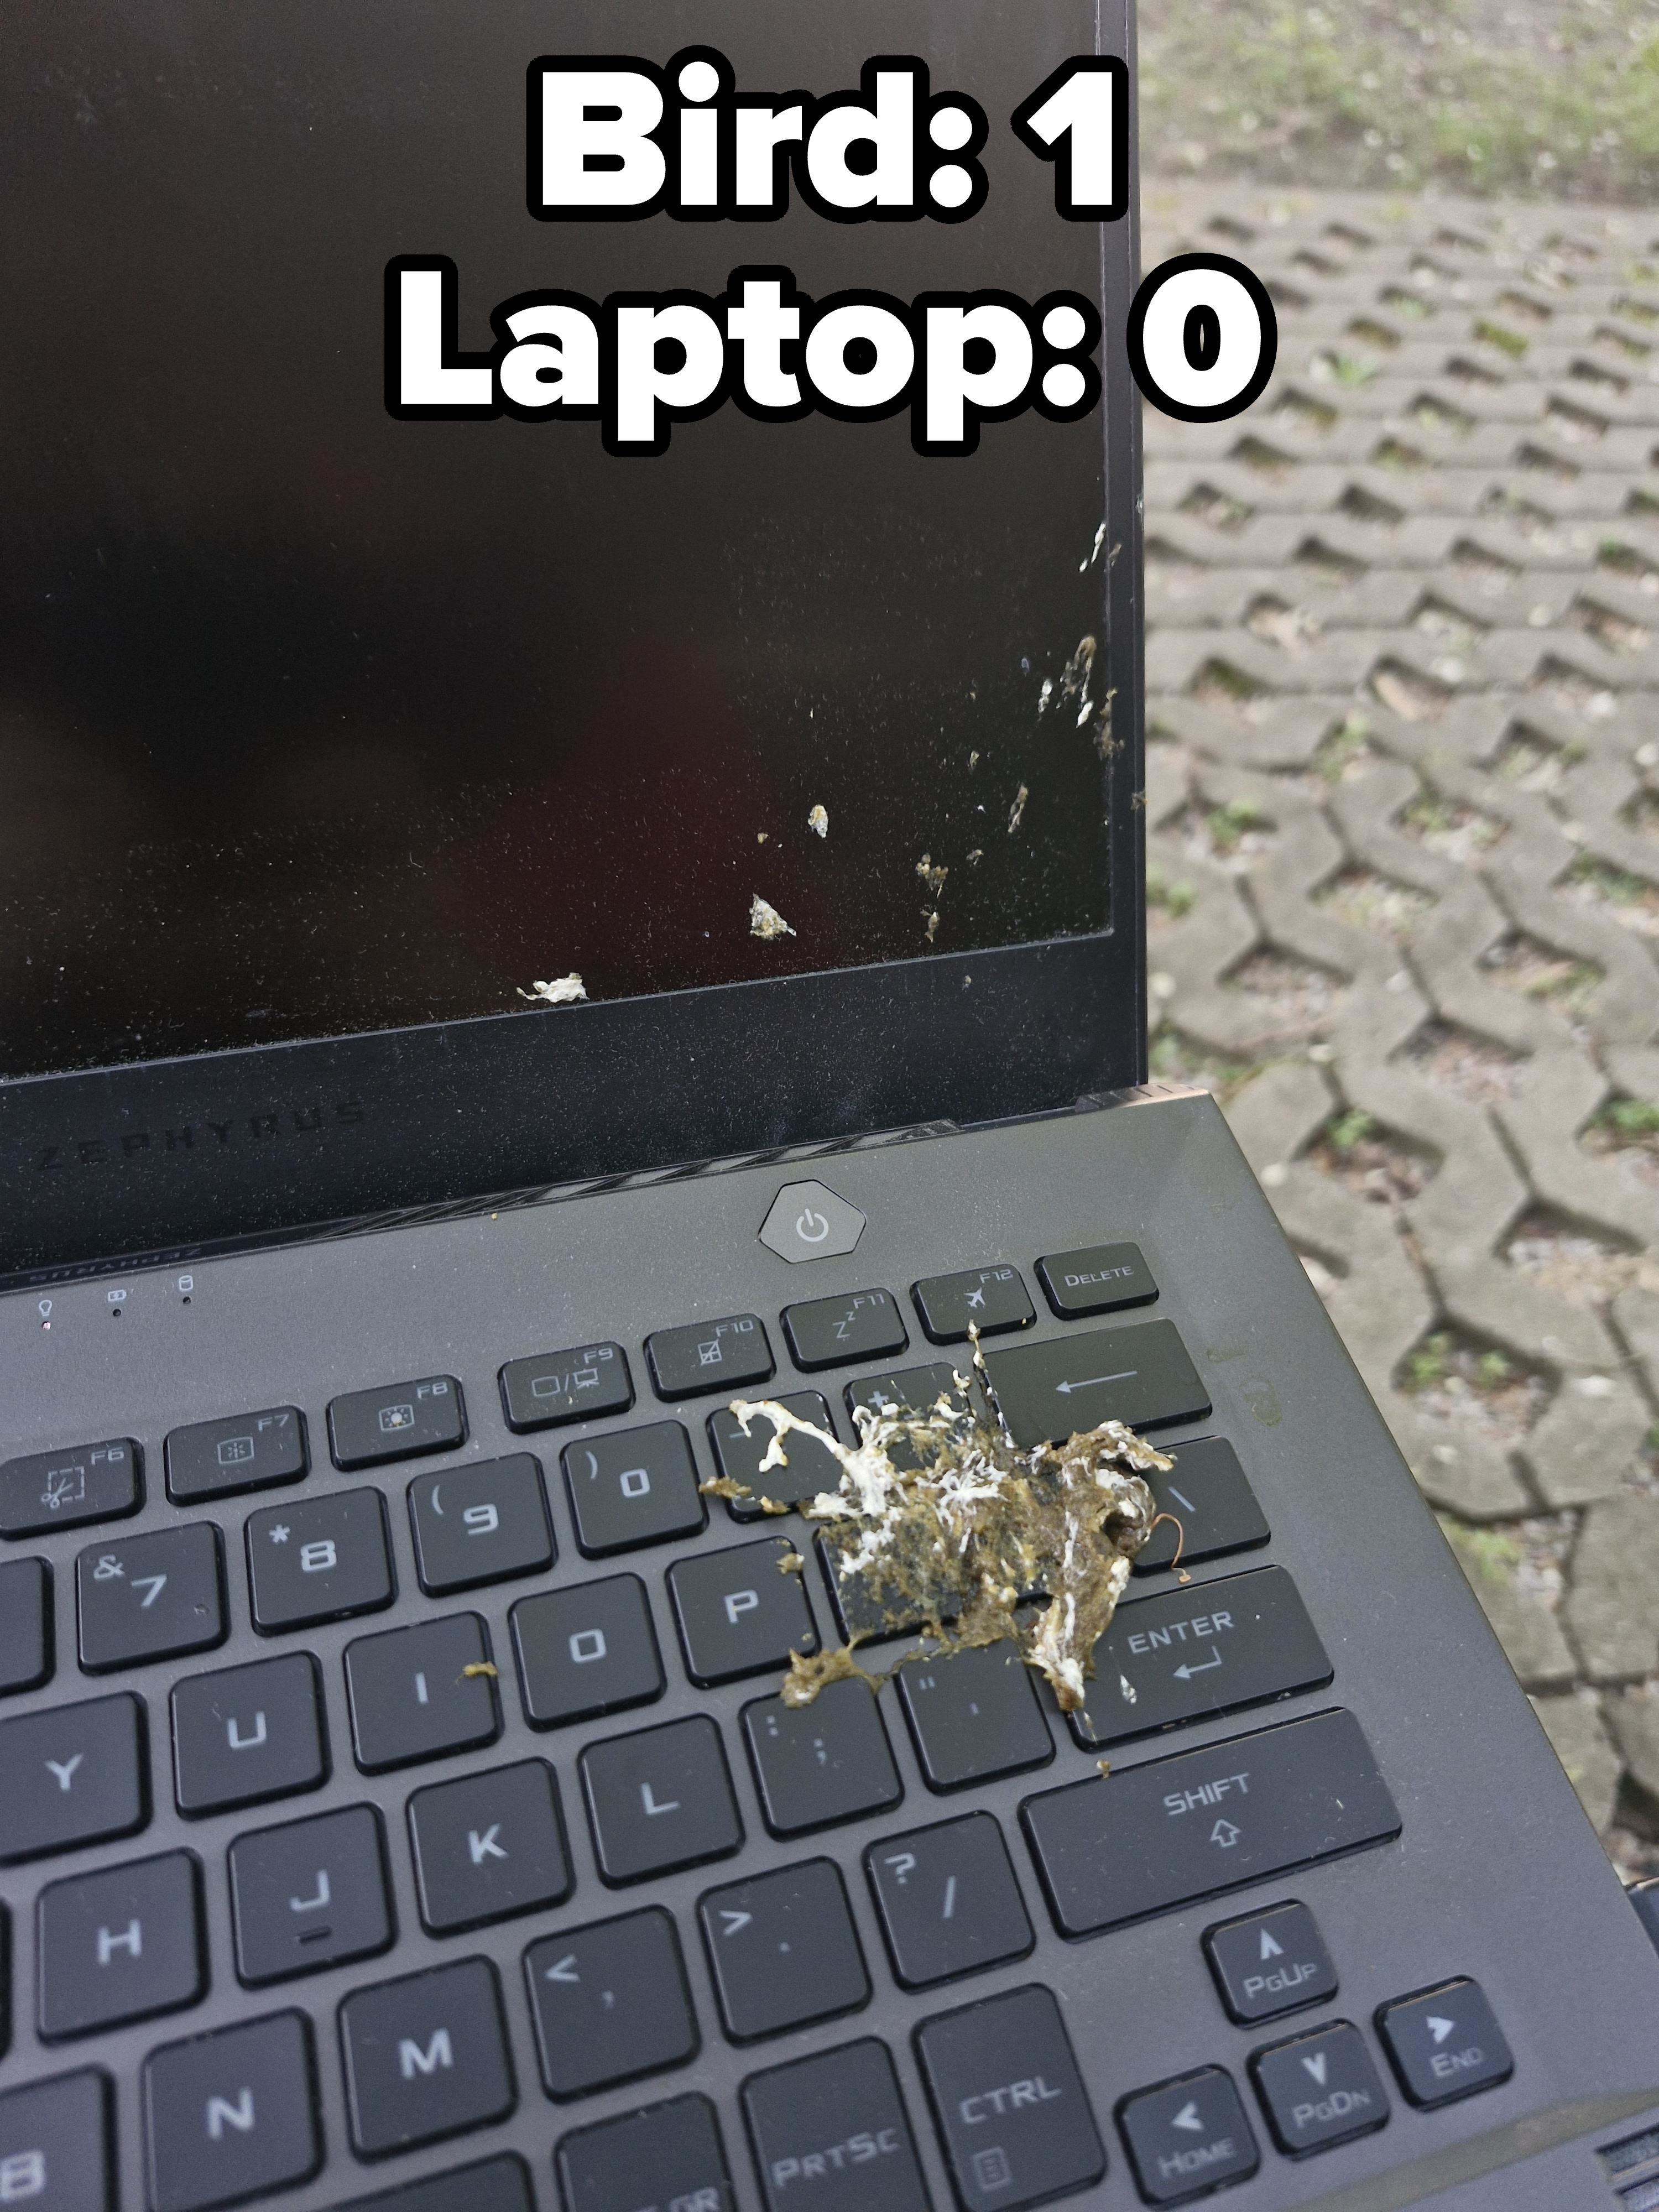 A laptop with bird droppings on the keyboard and screen, outdoors on a concrete surface